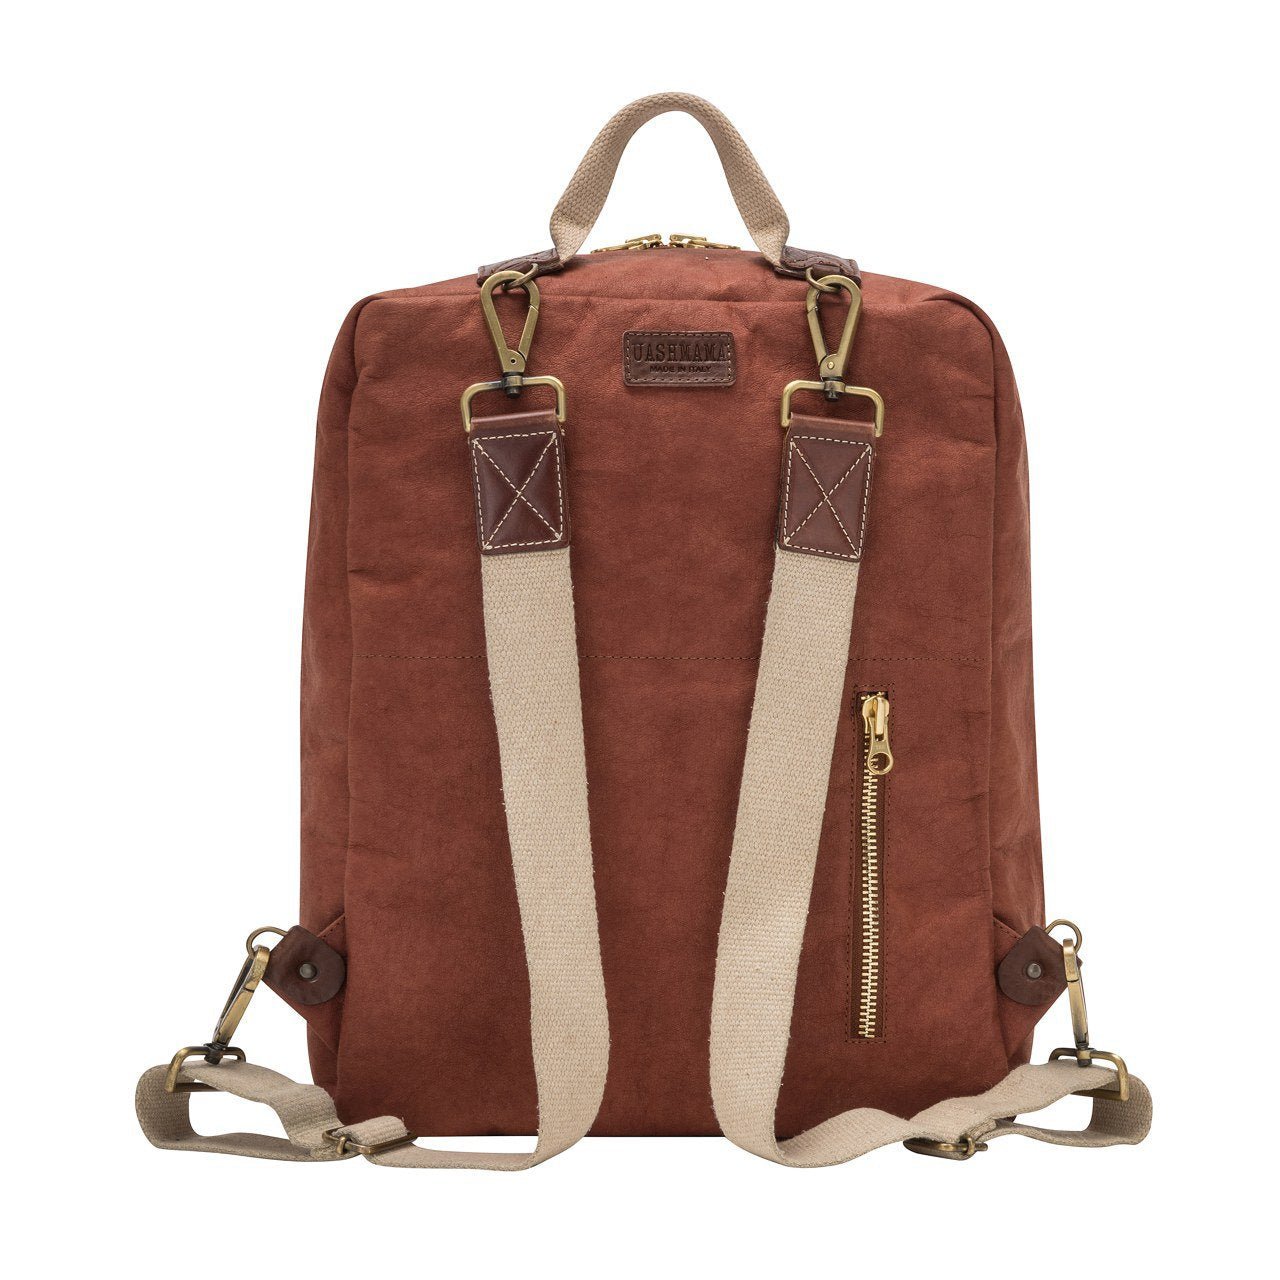 The rear of a washable paper backpack is shown. The backpack is in a cognac colour and has a top carry handle, and two recycled cotton straps. A vertical zip pocket is also shown.